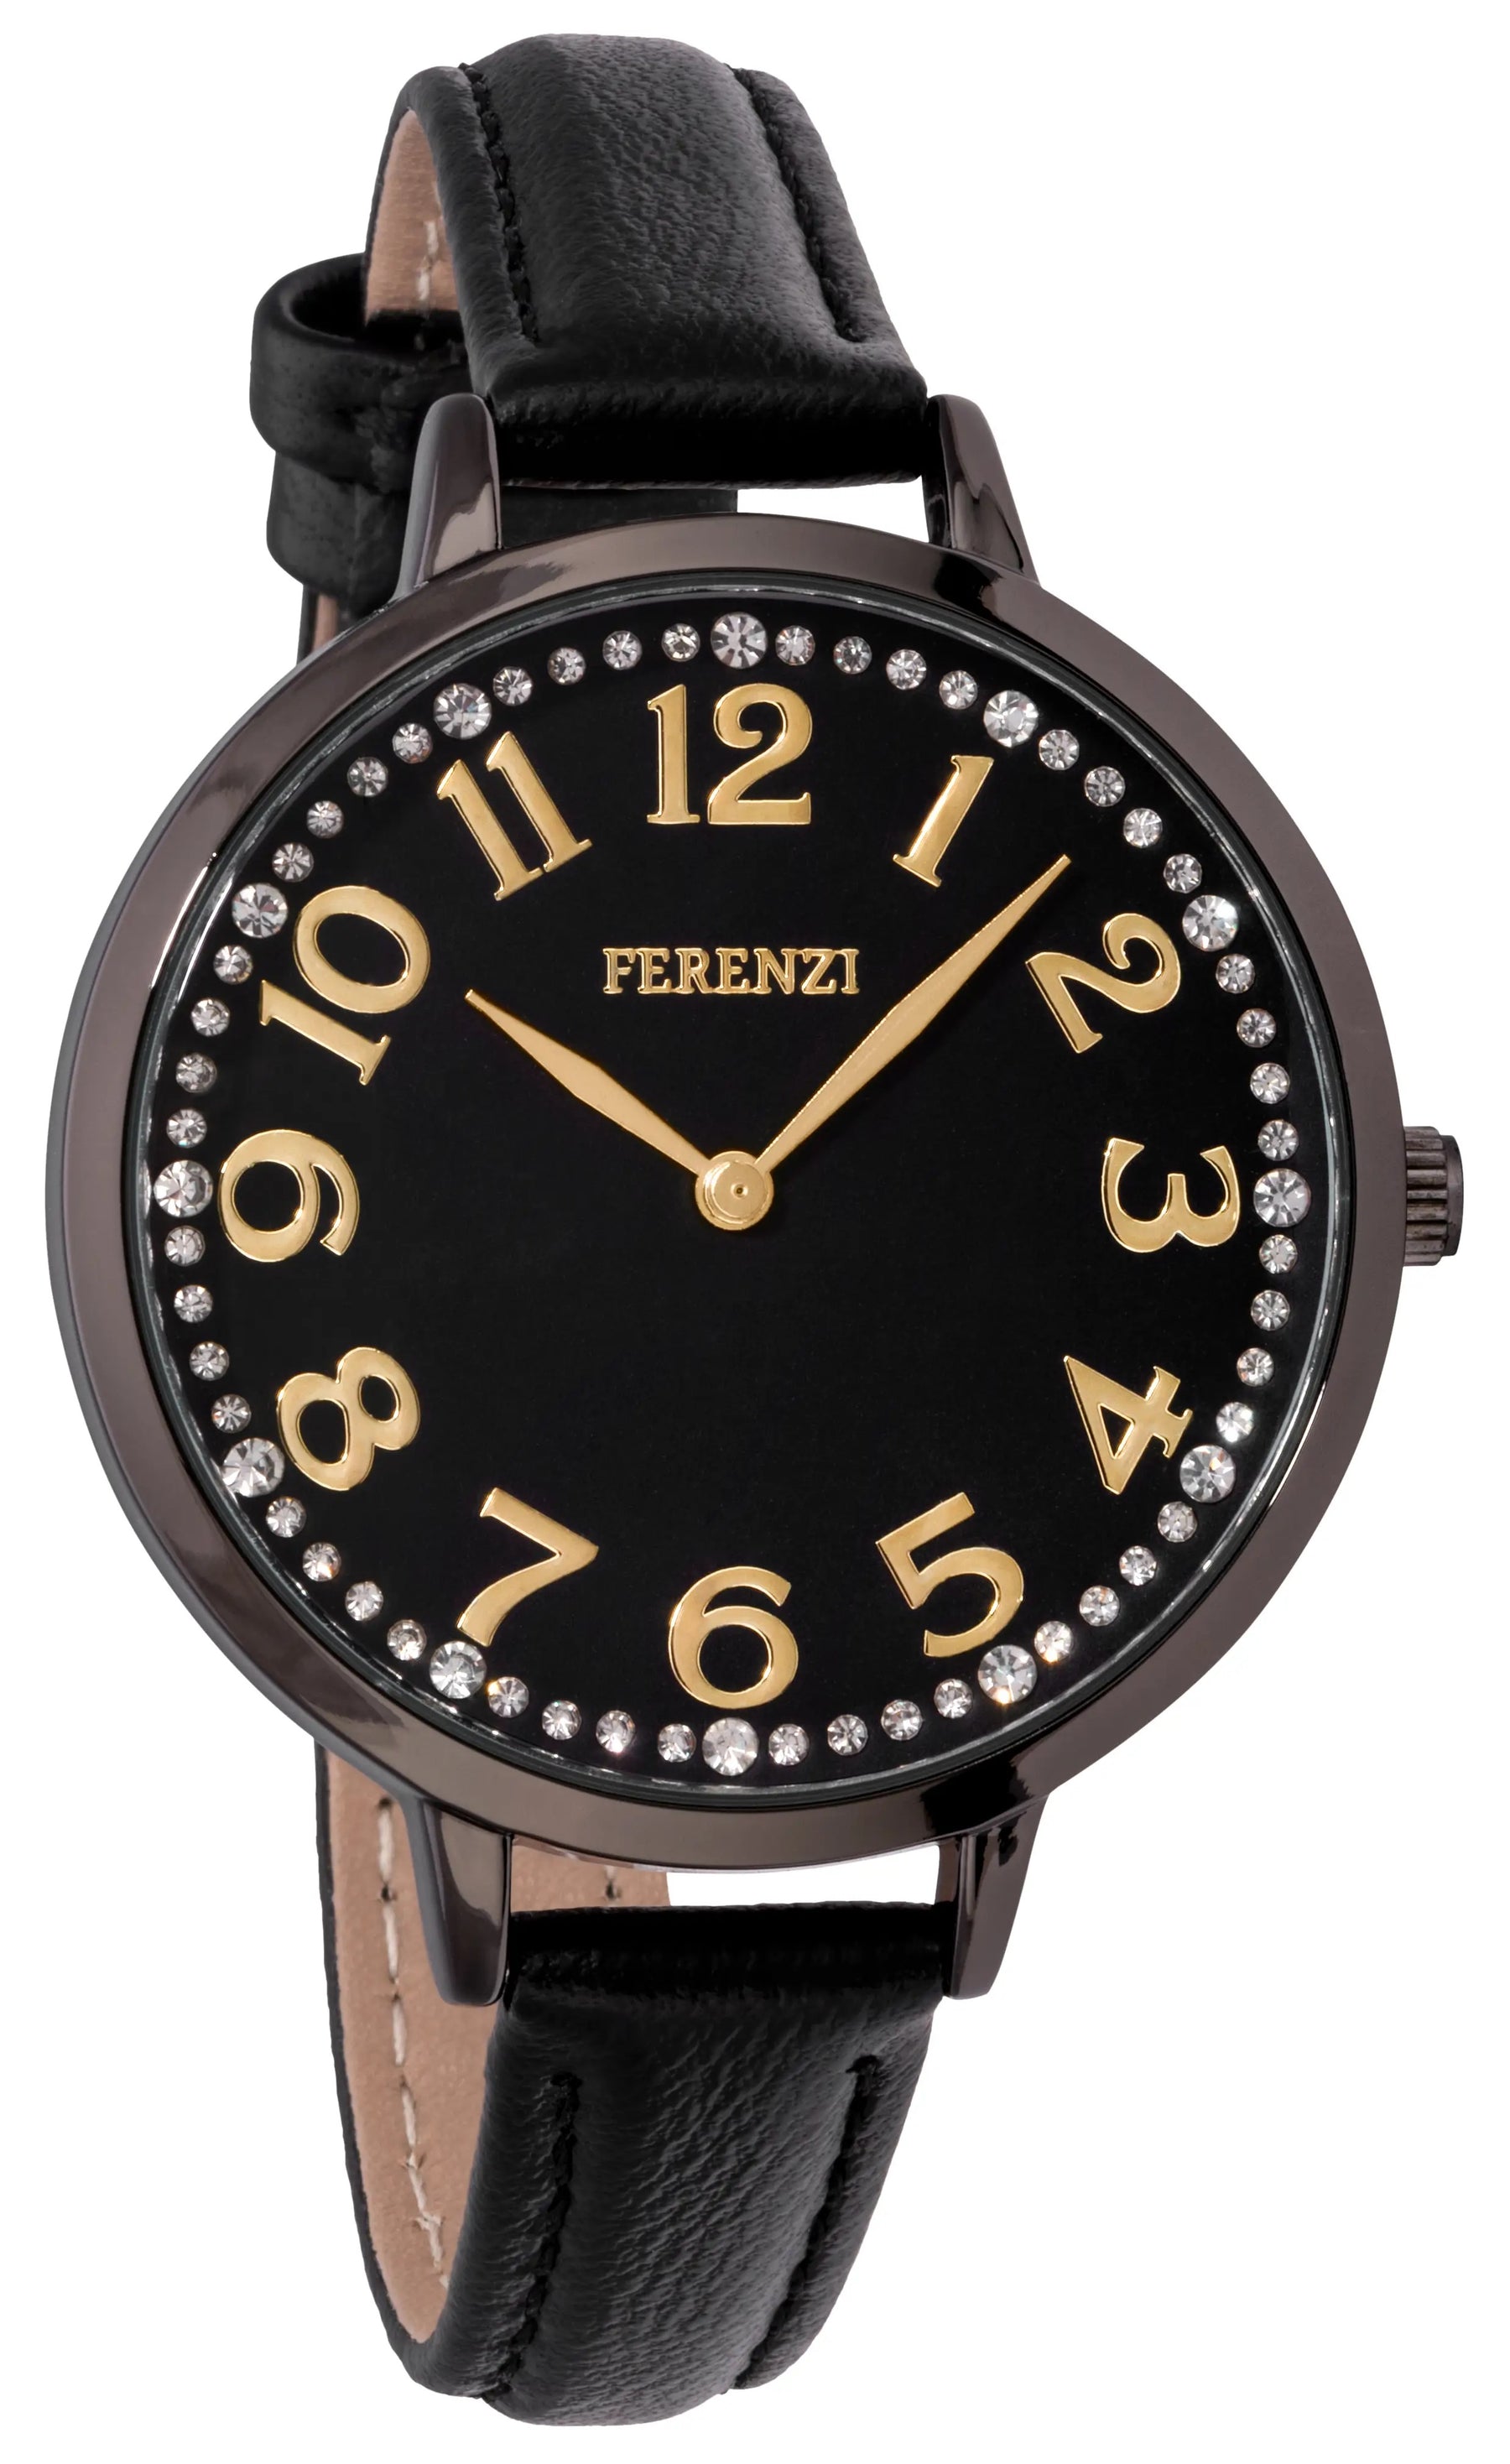 Marciano - Ferenzi Womens Watch, Black Dial Featuring Big Gold Numbers & White Stones, Black